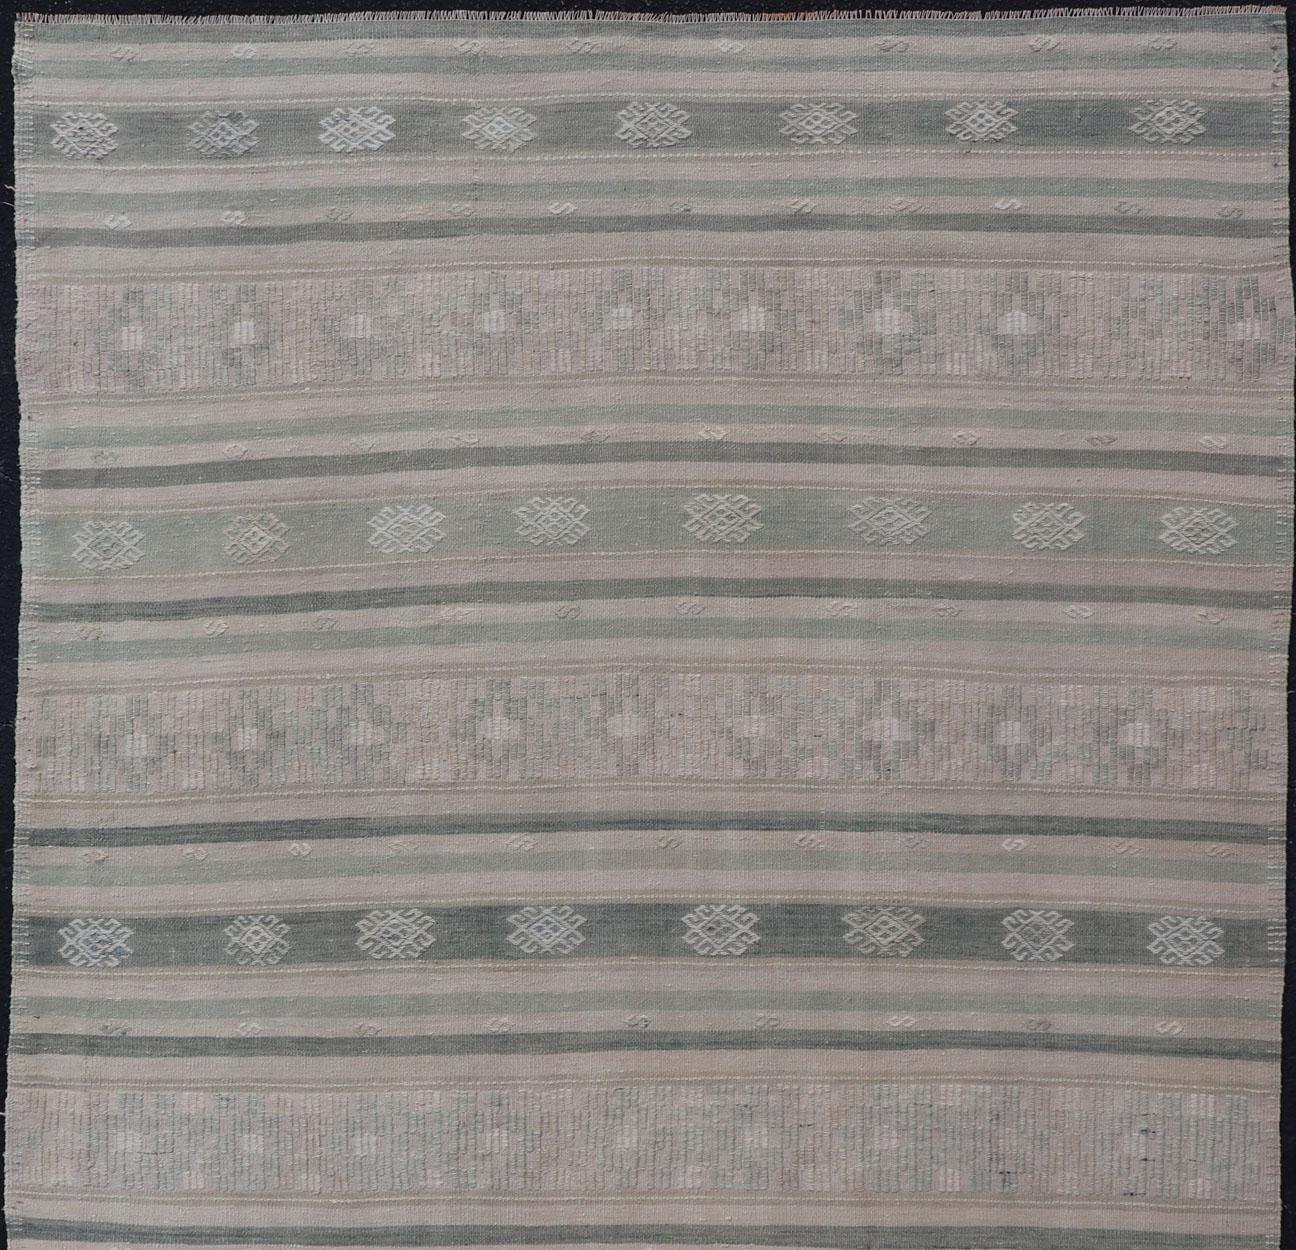 Flat-Weave Hand Woven Kilim with Embroideries in Taupe, Tan, Blue and Gray In Good Condition For Sale In Atlanta, GA